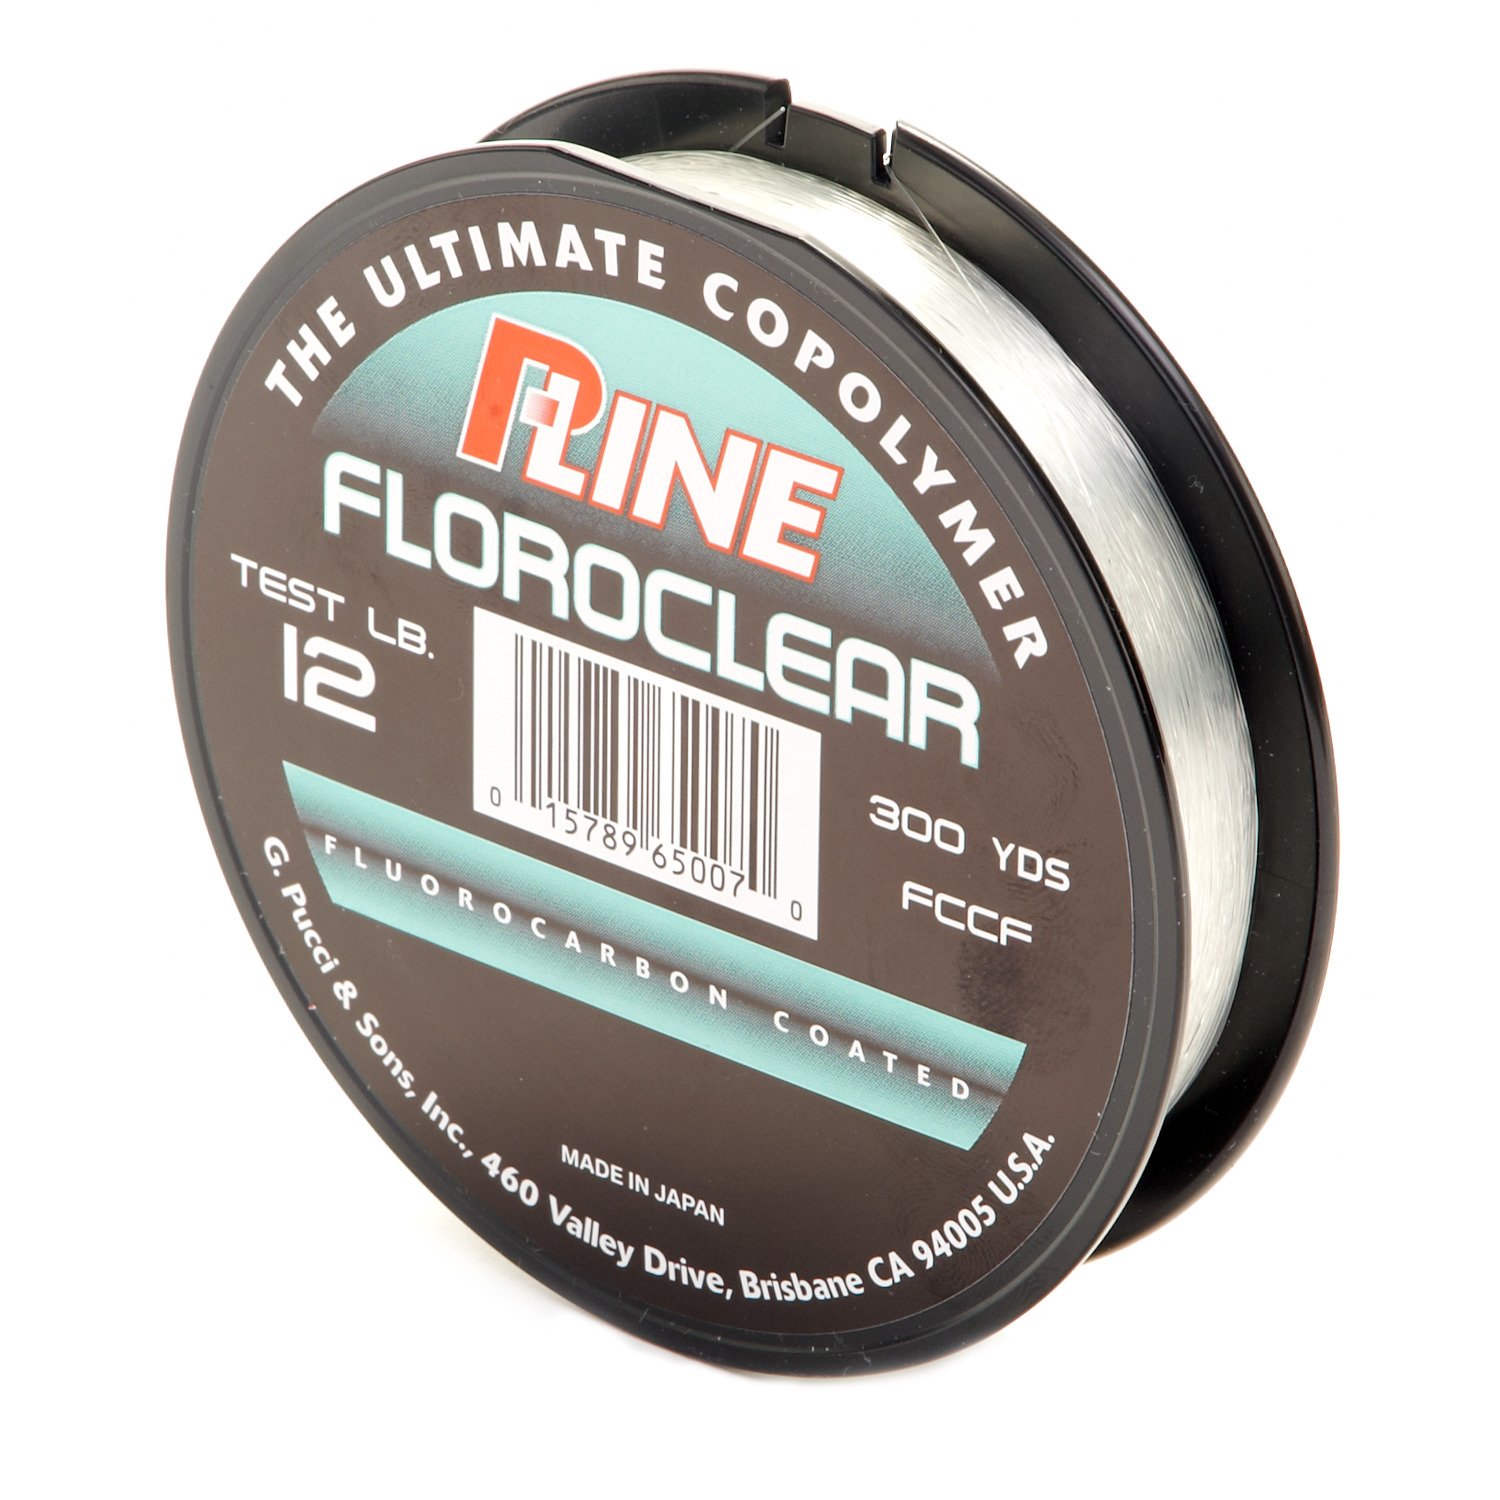 P-Line® Floroclear 12 lb. - 300 yards Fluorocarbon Fishing Line                                                                 - view number 1 selected